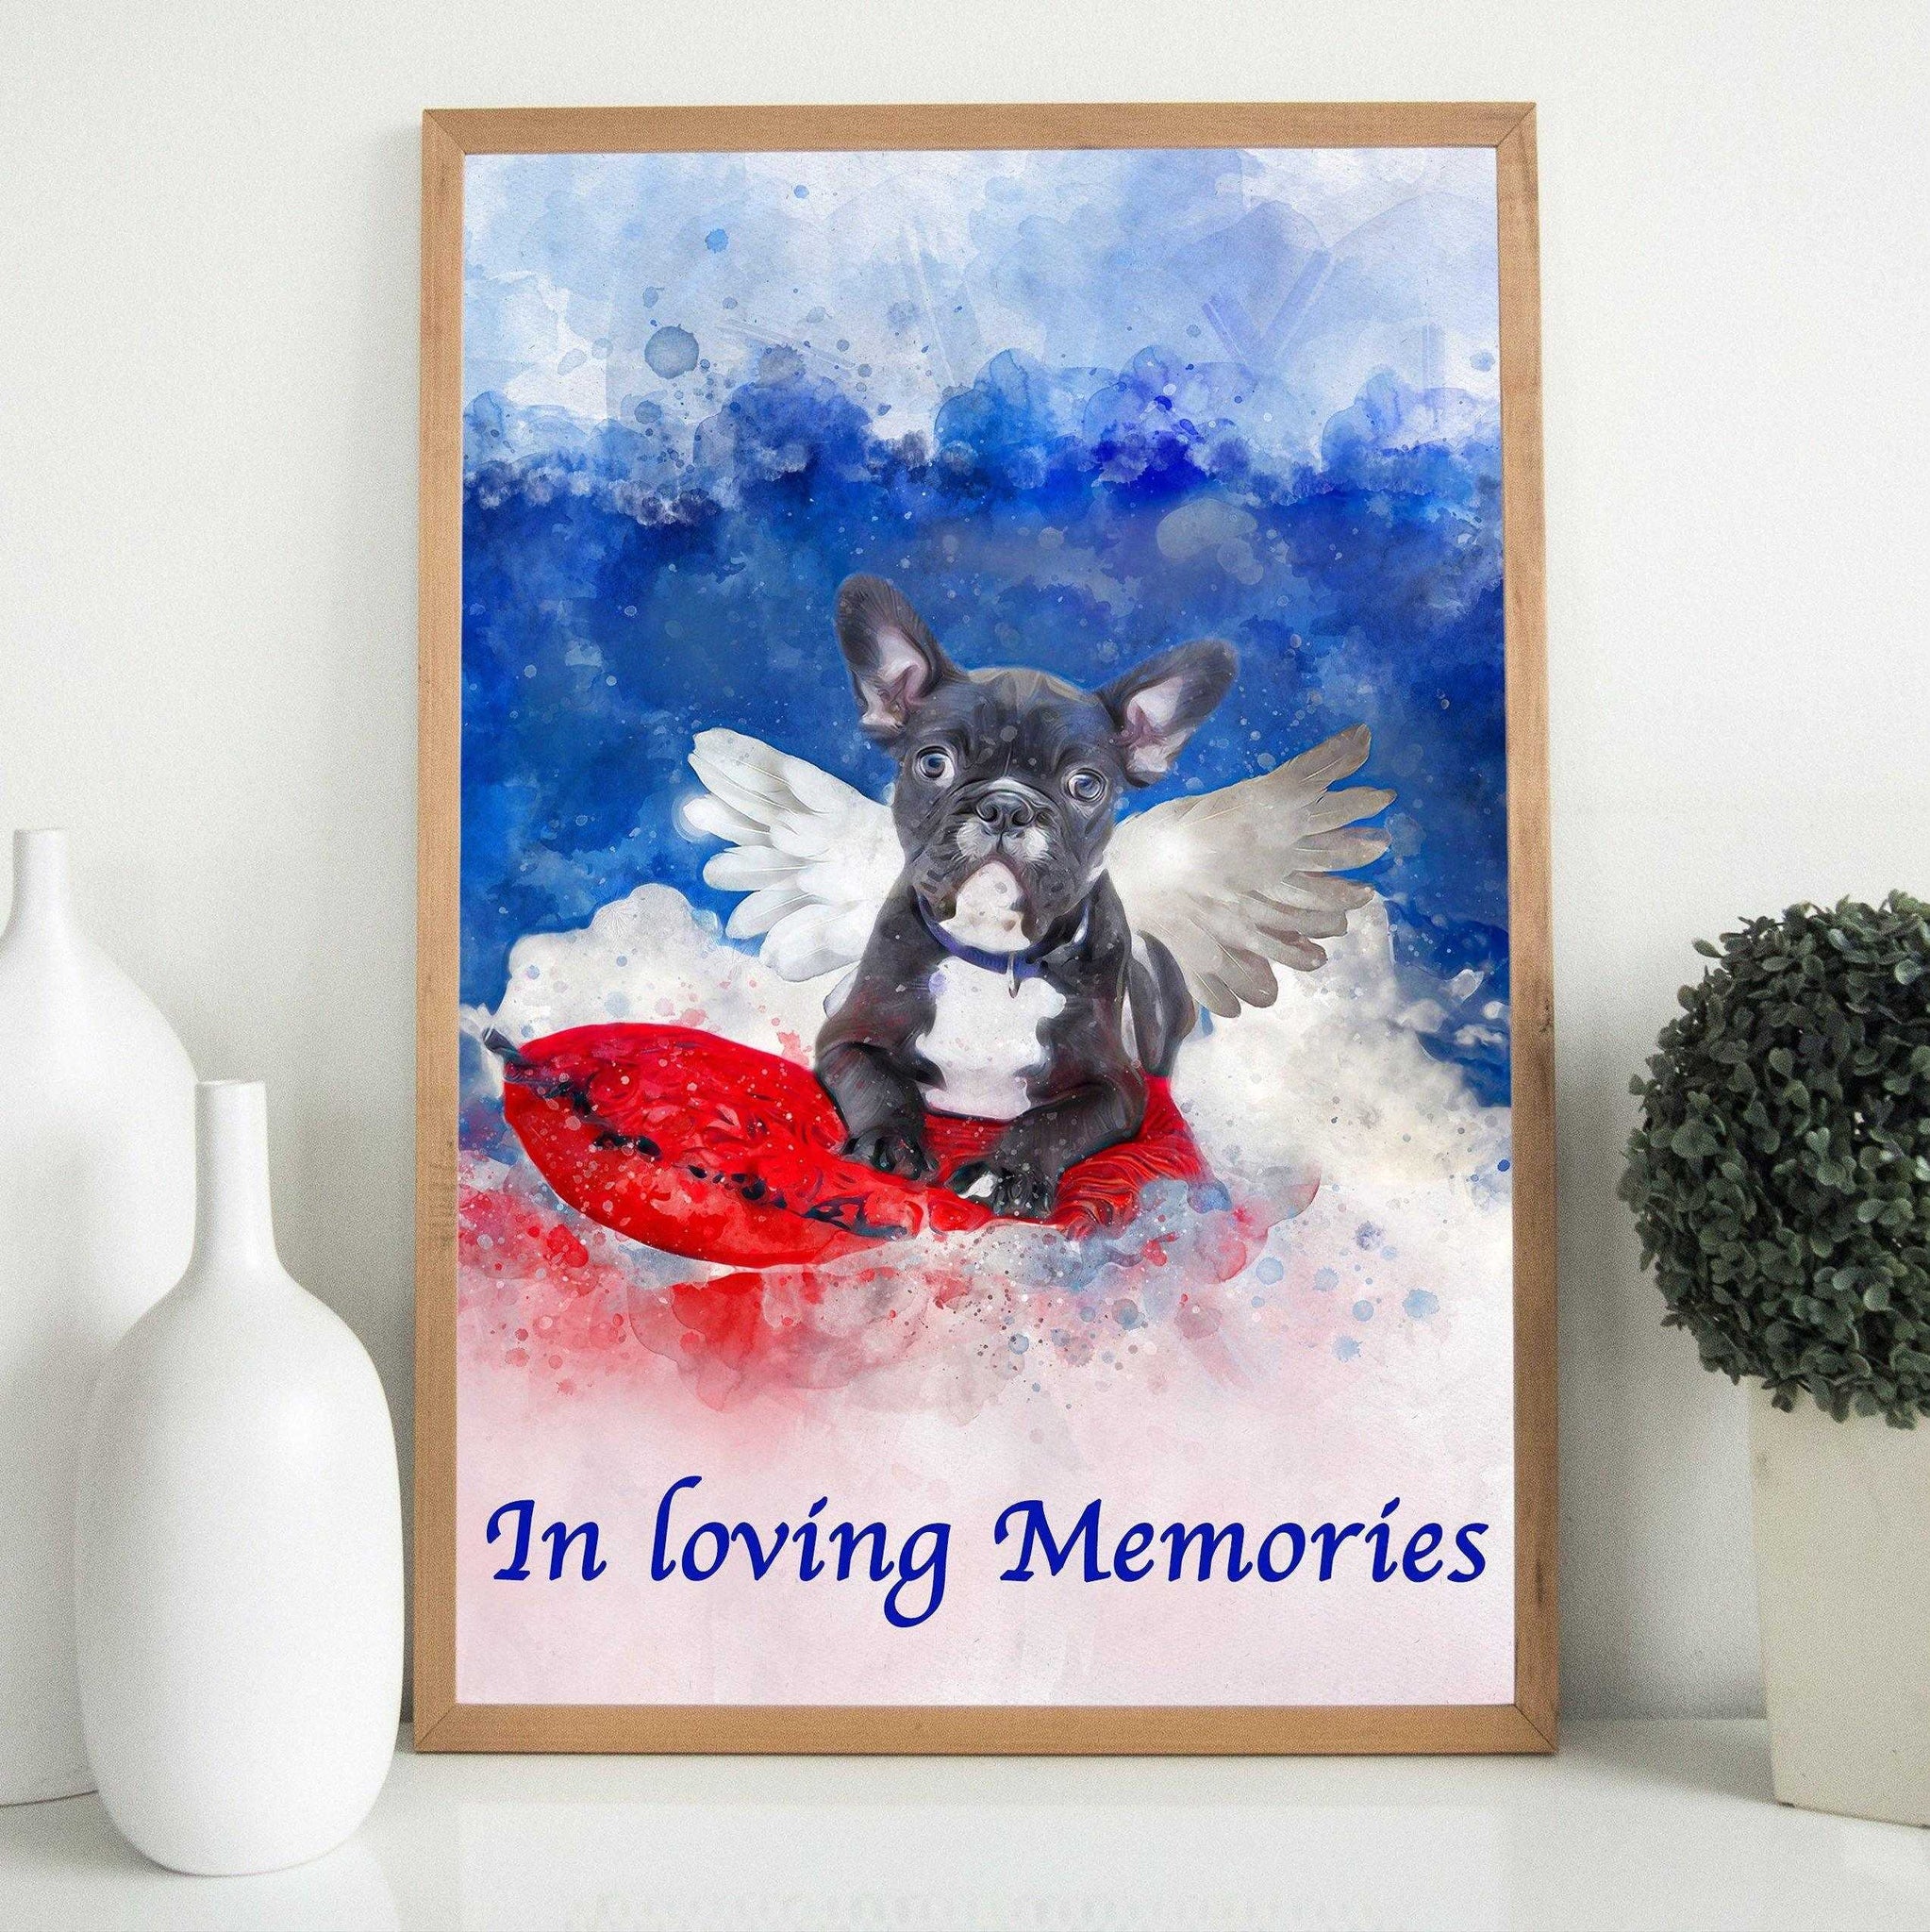 Custom Dog with Angel Wings Painting | Personalized Dog Portraits | Pet Portrait with Angel Wings | Add Wings and Halo to Dog - FromPicToArt